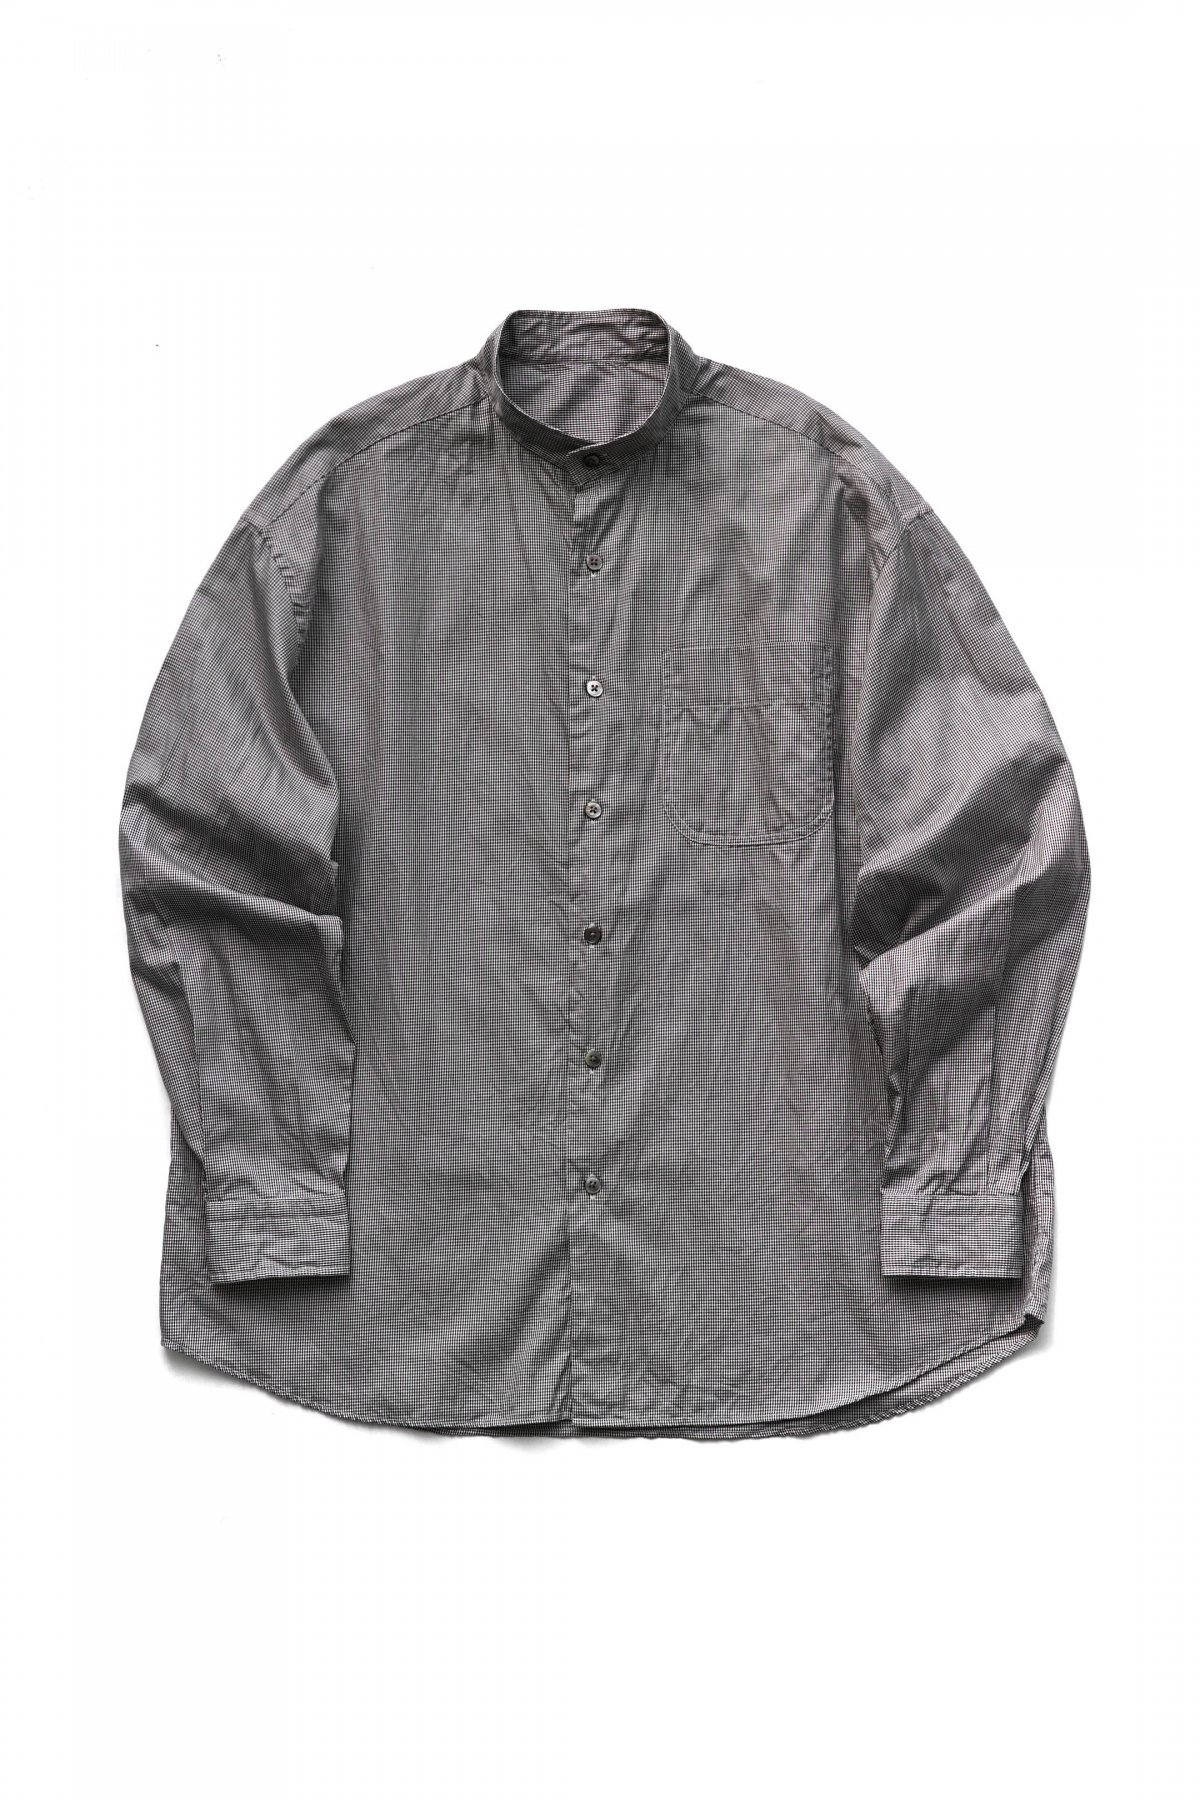 SWISS COTTON STAND COLLAR CHECK SHIRTJAPAN